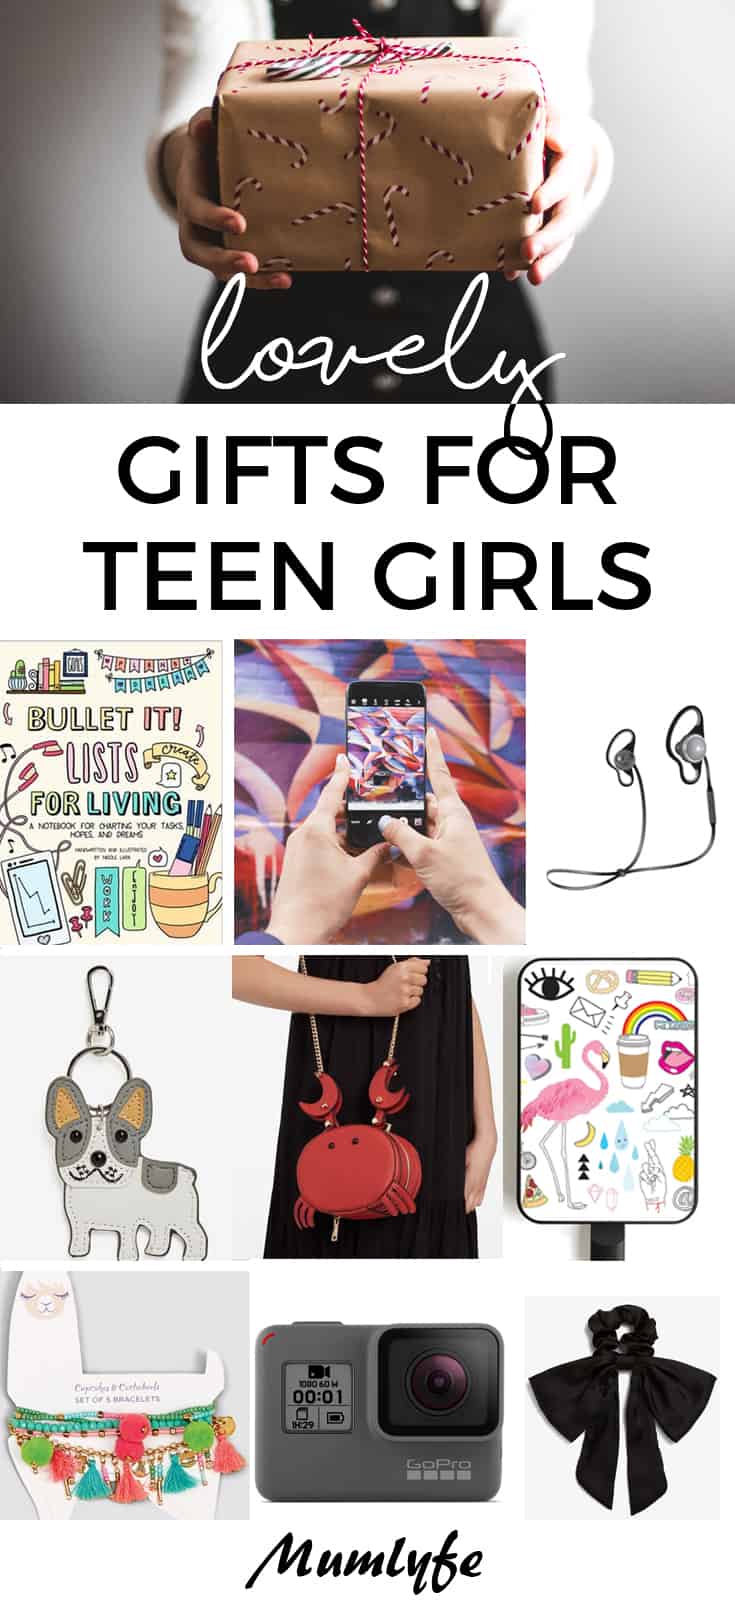 Lovely gifts for teen girls - gifts teen girls will love